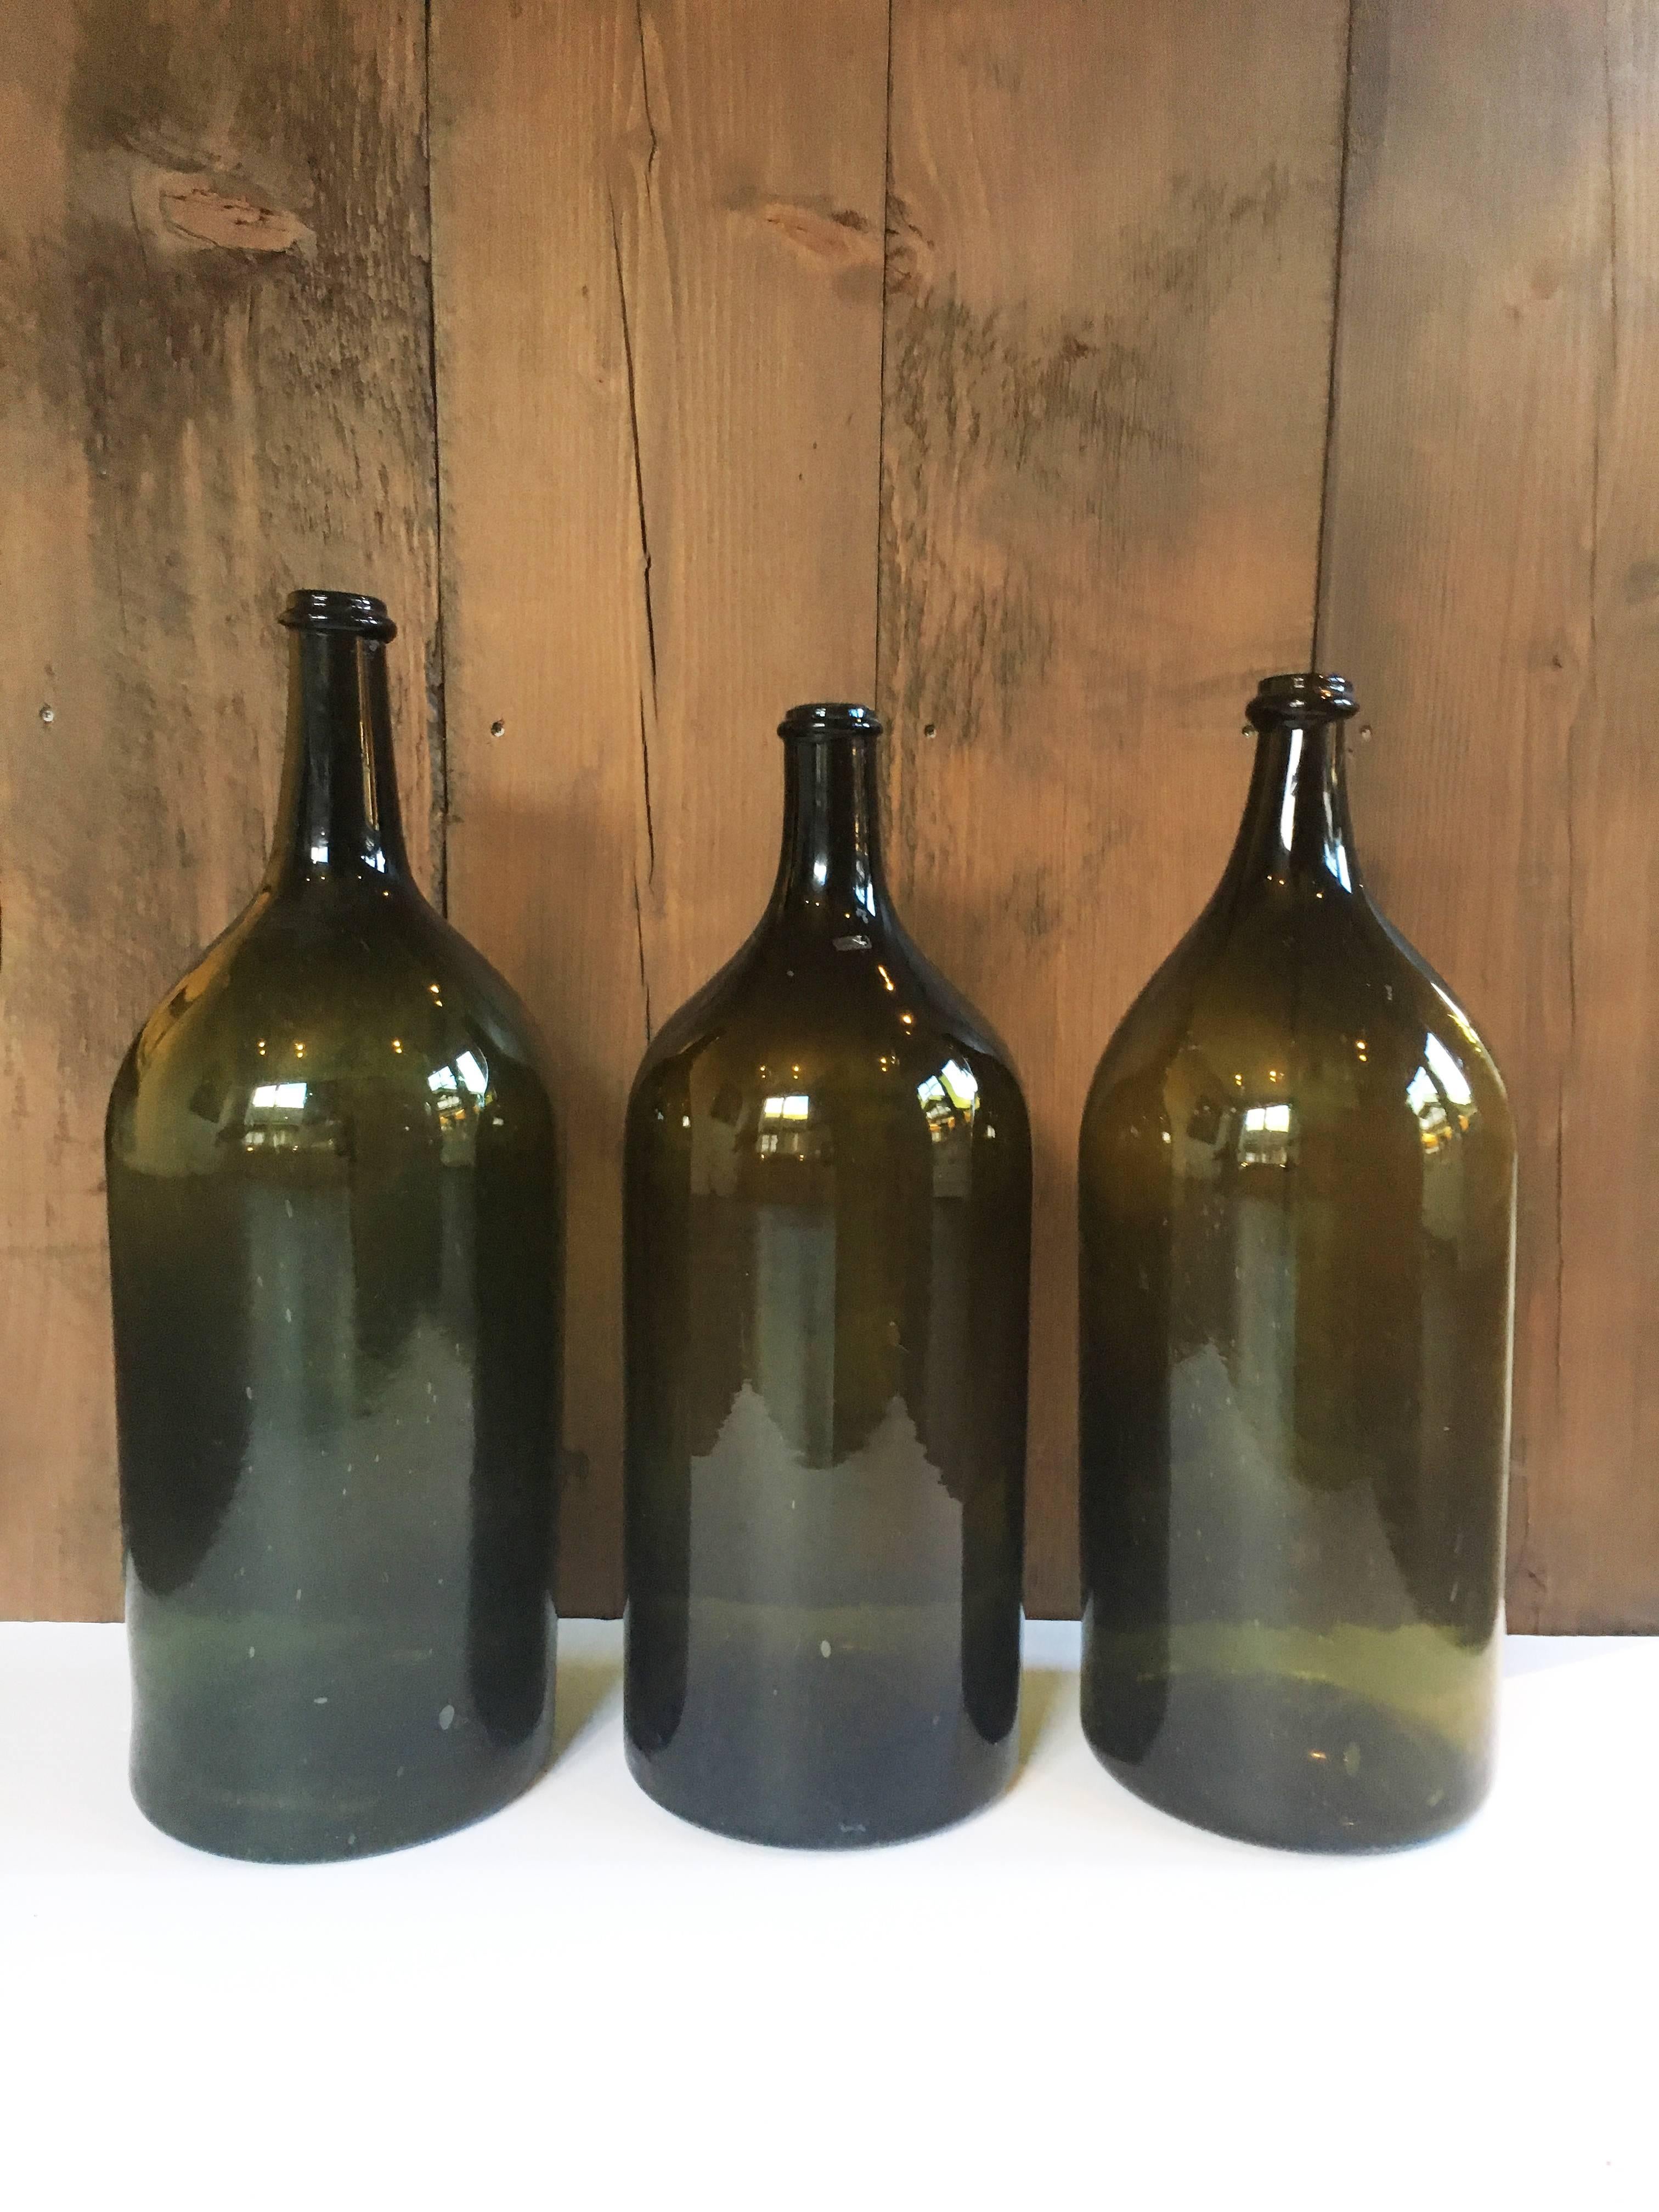 Vintage unmarked large format glass wine bottles from France. Mid-19th century, circa 1860. 

Green glass varies from olive to darker hunter green. 

Please inquire for individual measurements; priced individually.